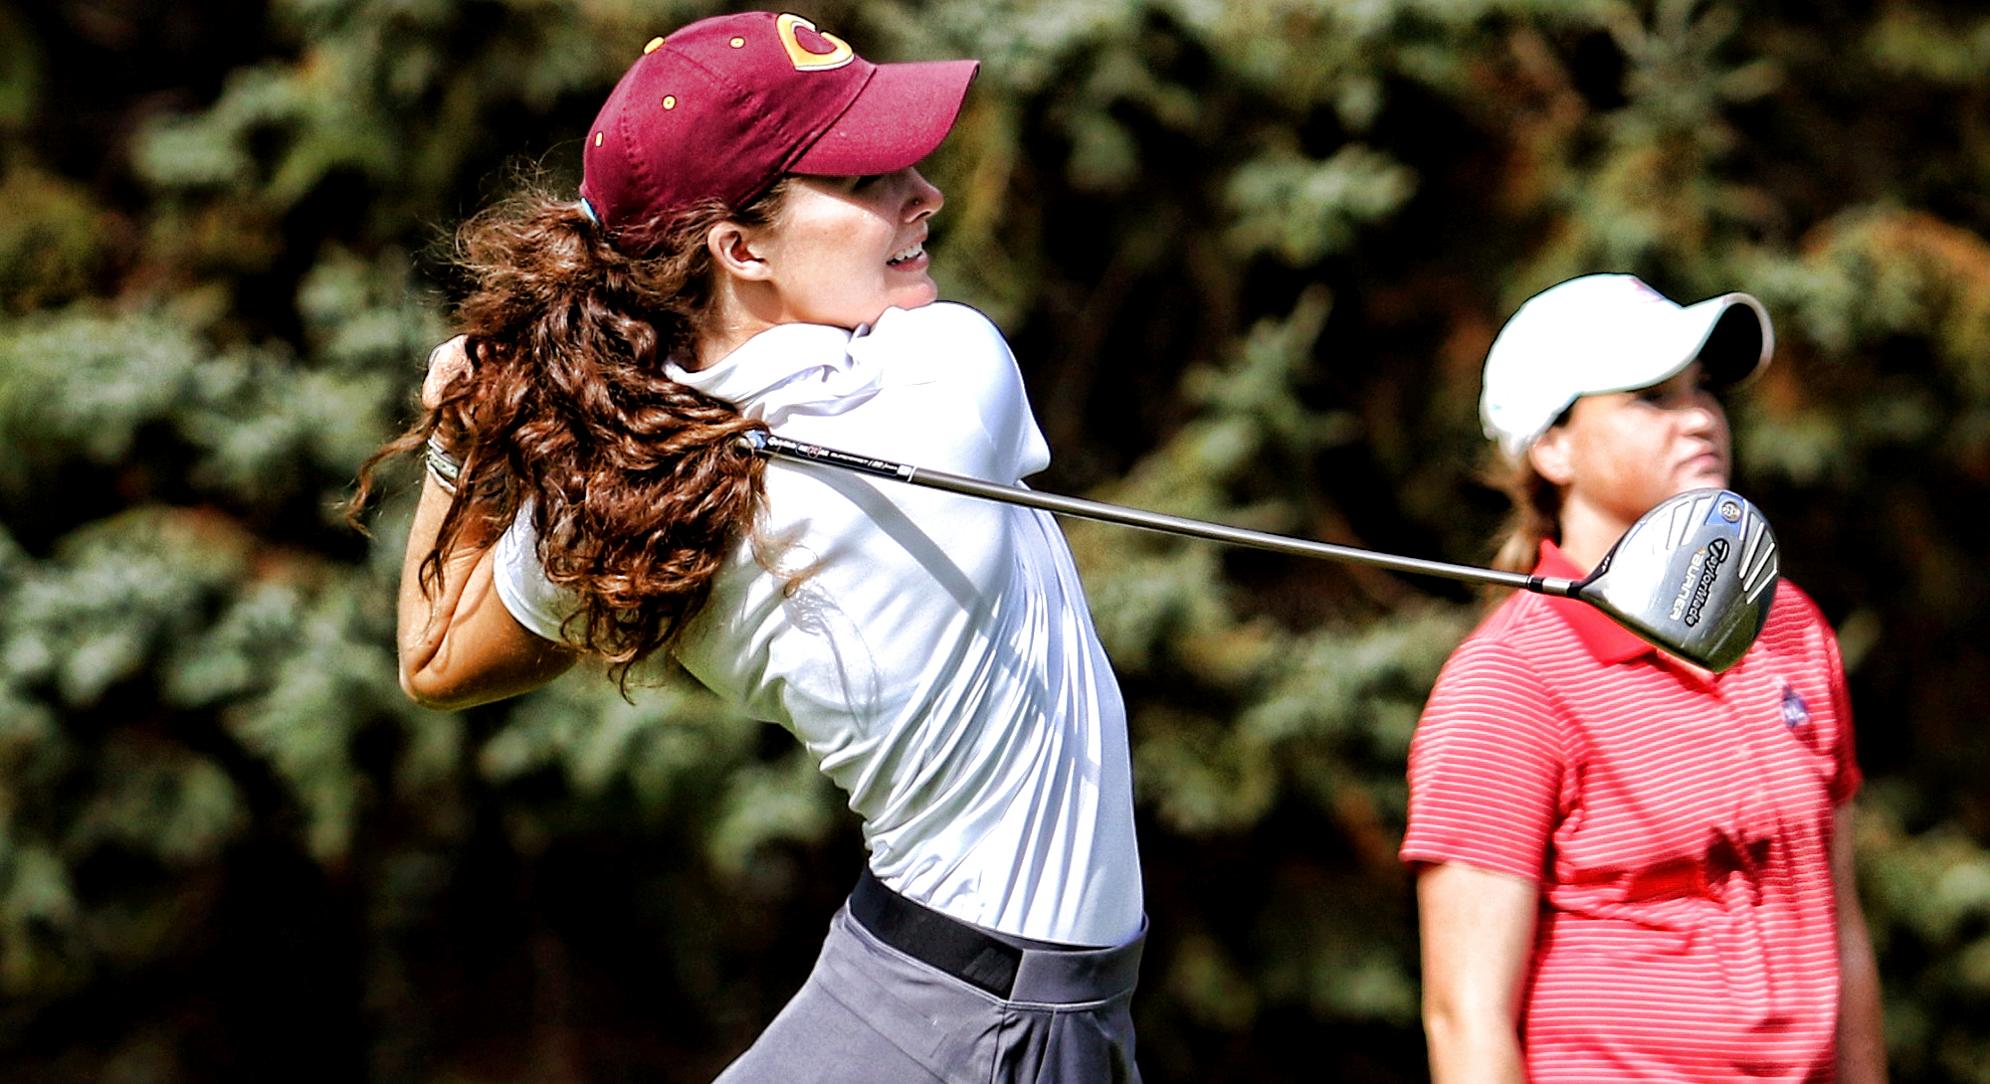 Senior Emily Grace Olson tees off during the third round at the MIAC Championship Meet. (Pic courtesy of Don Stoner - Augsburg Sports Information)